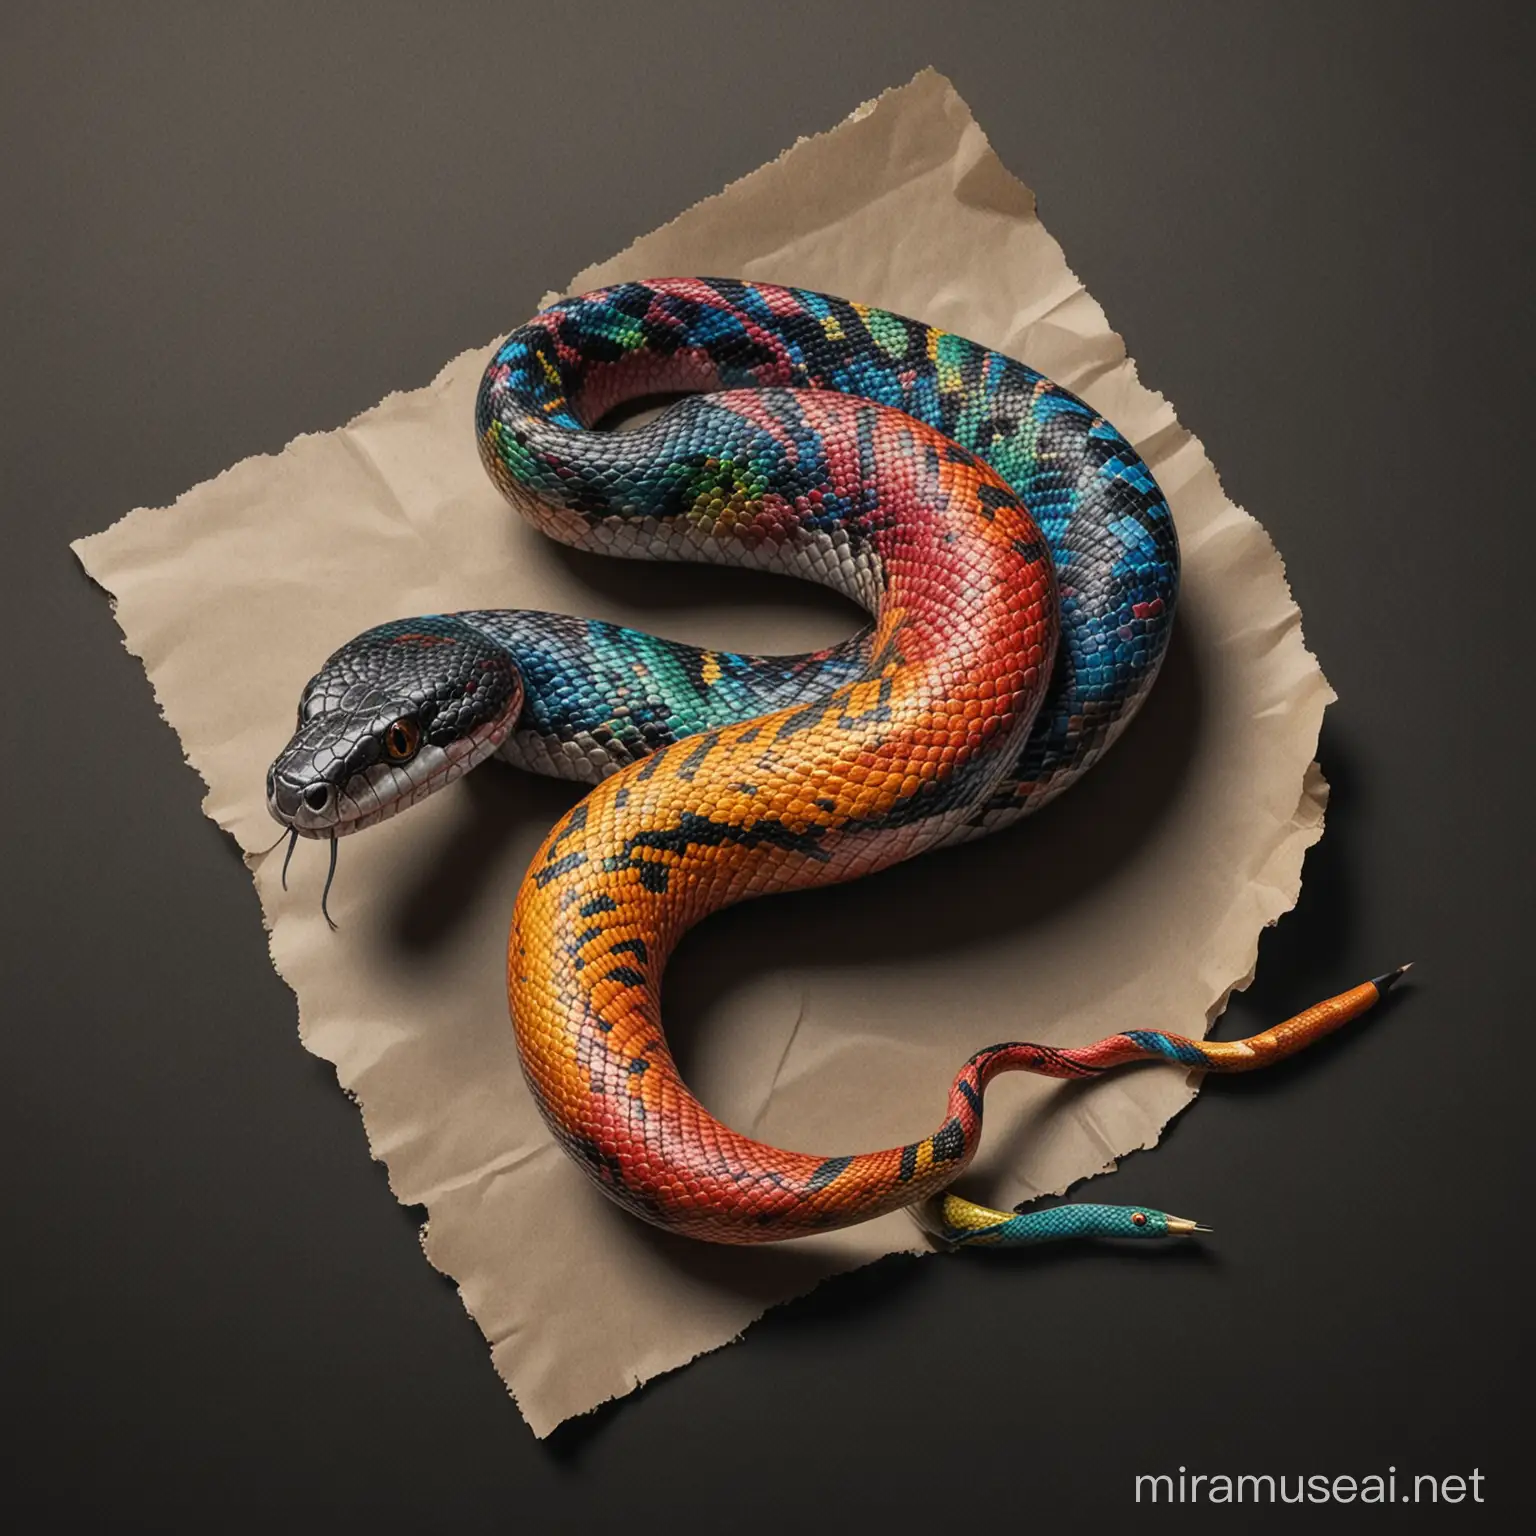 Dynamic Multicolored Snake with Pencil Tail on Crumpled Paper